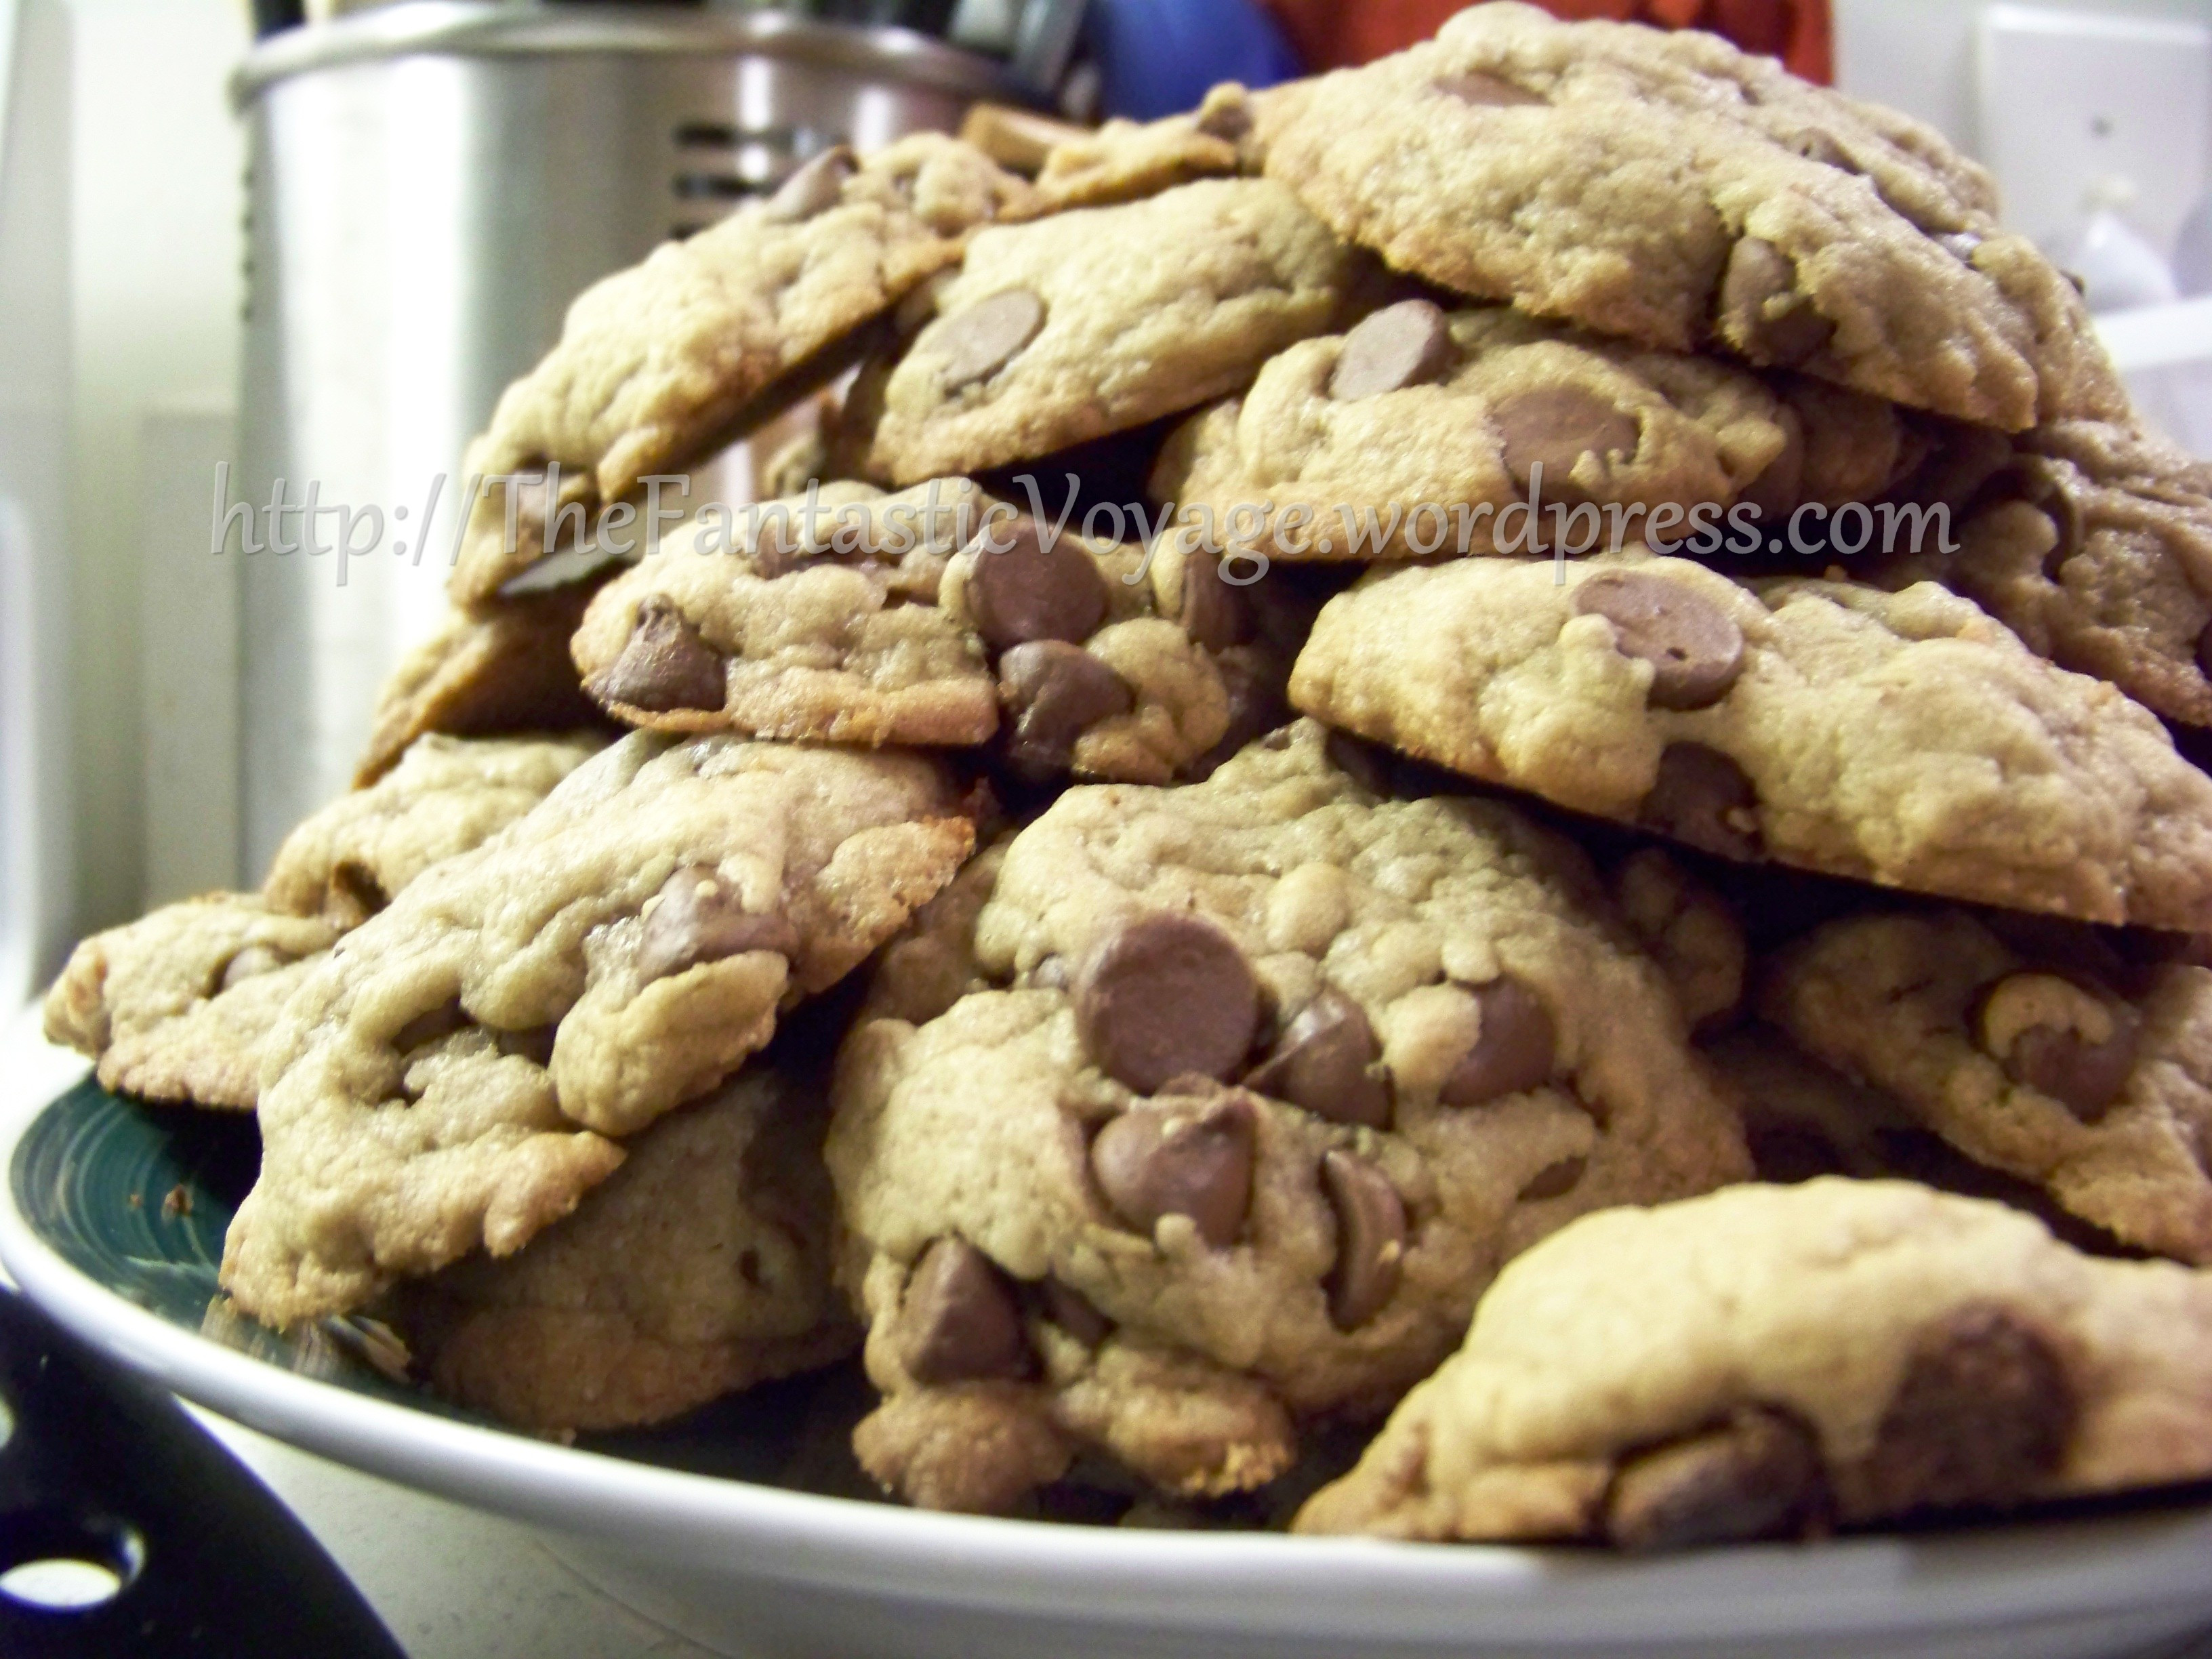 Bacon Chocolate Chip Cookies
 Bacon Chocolate Chip Cookies